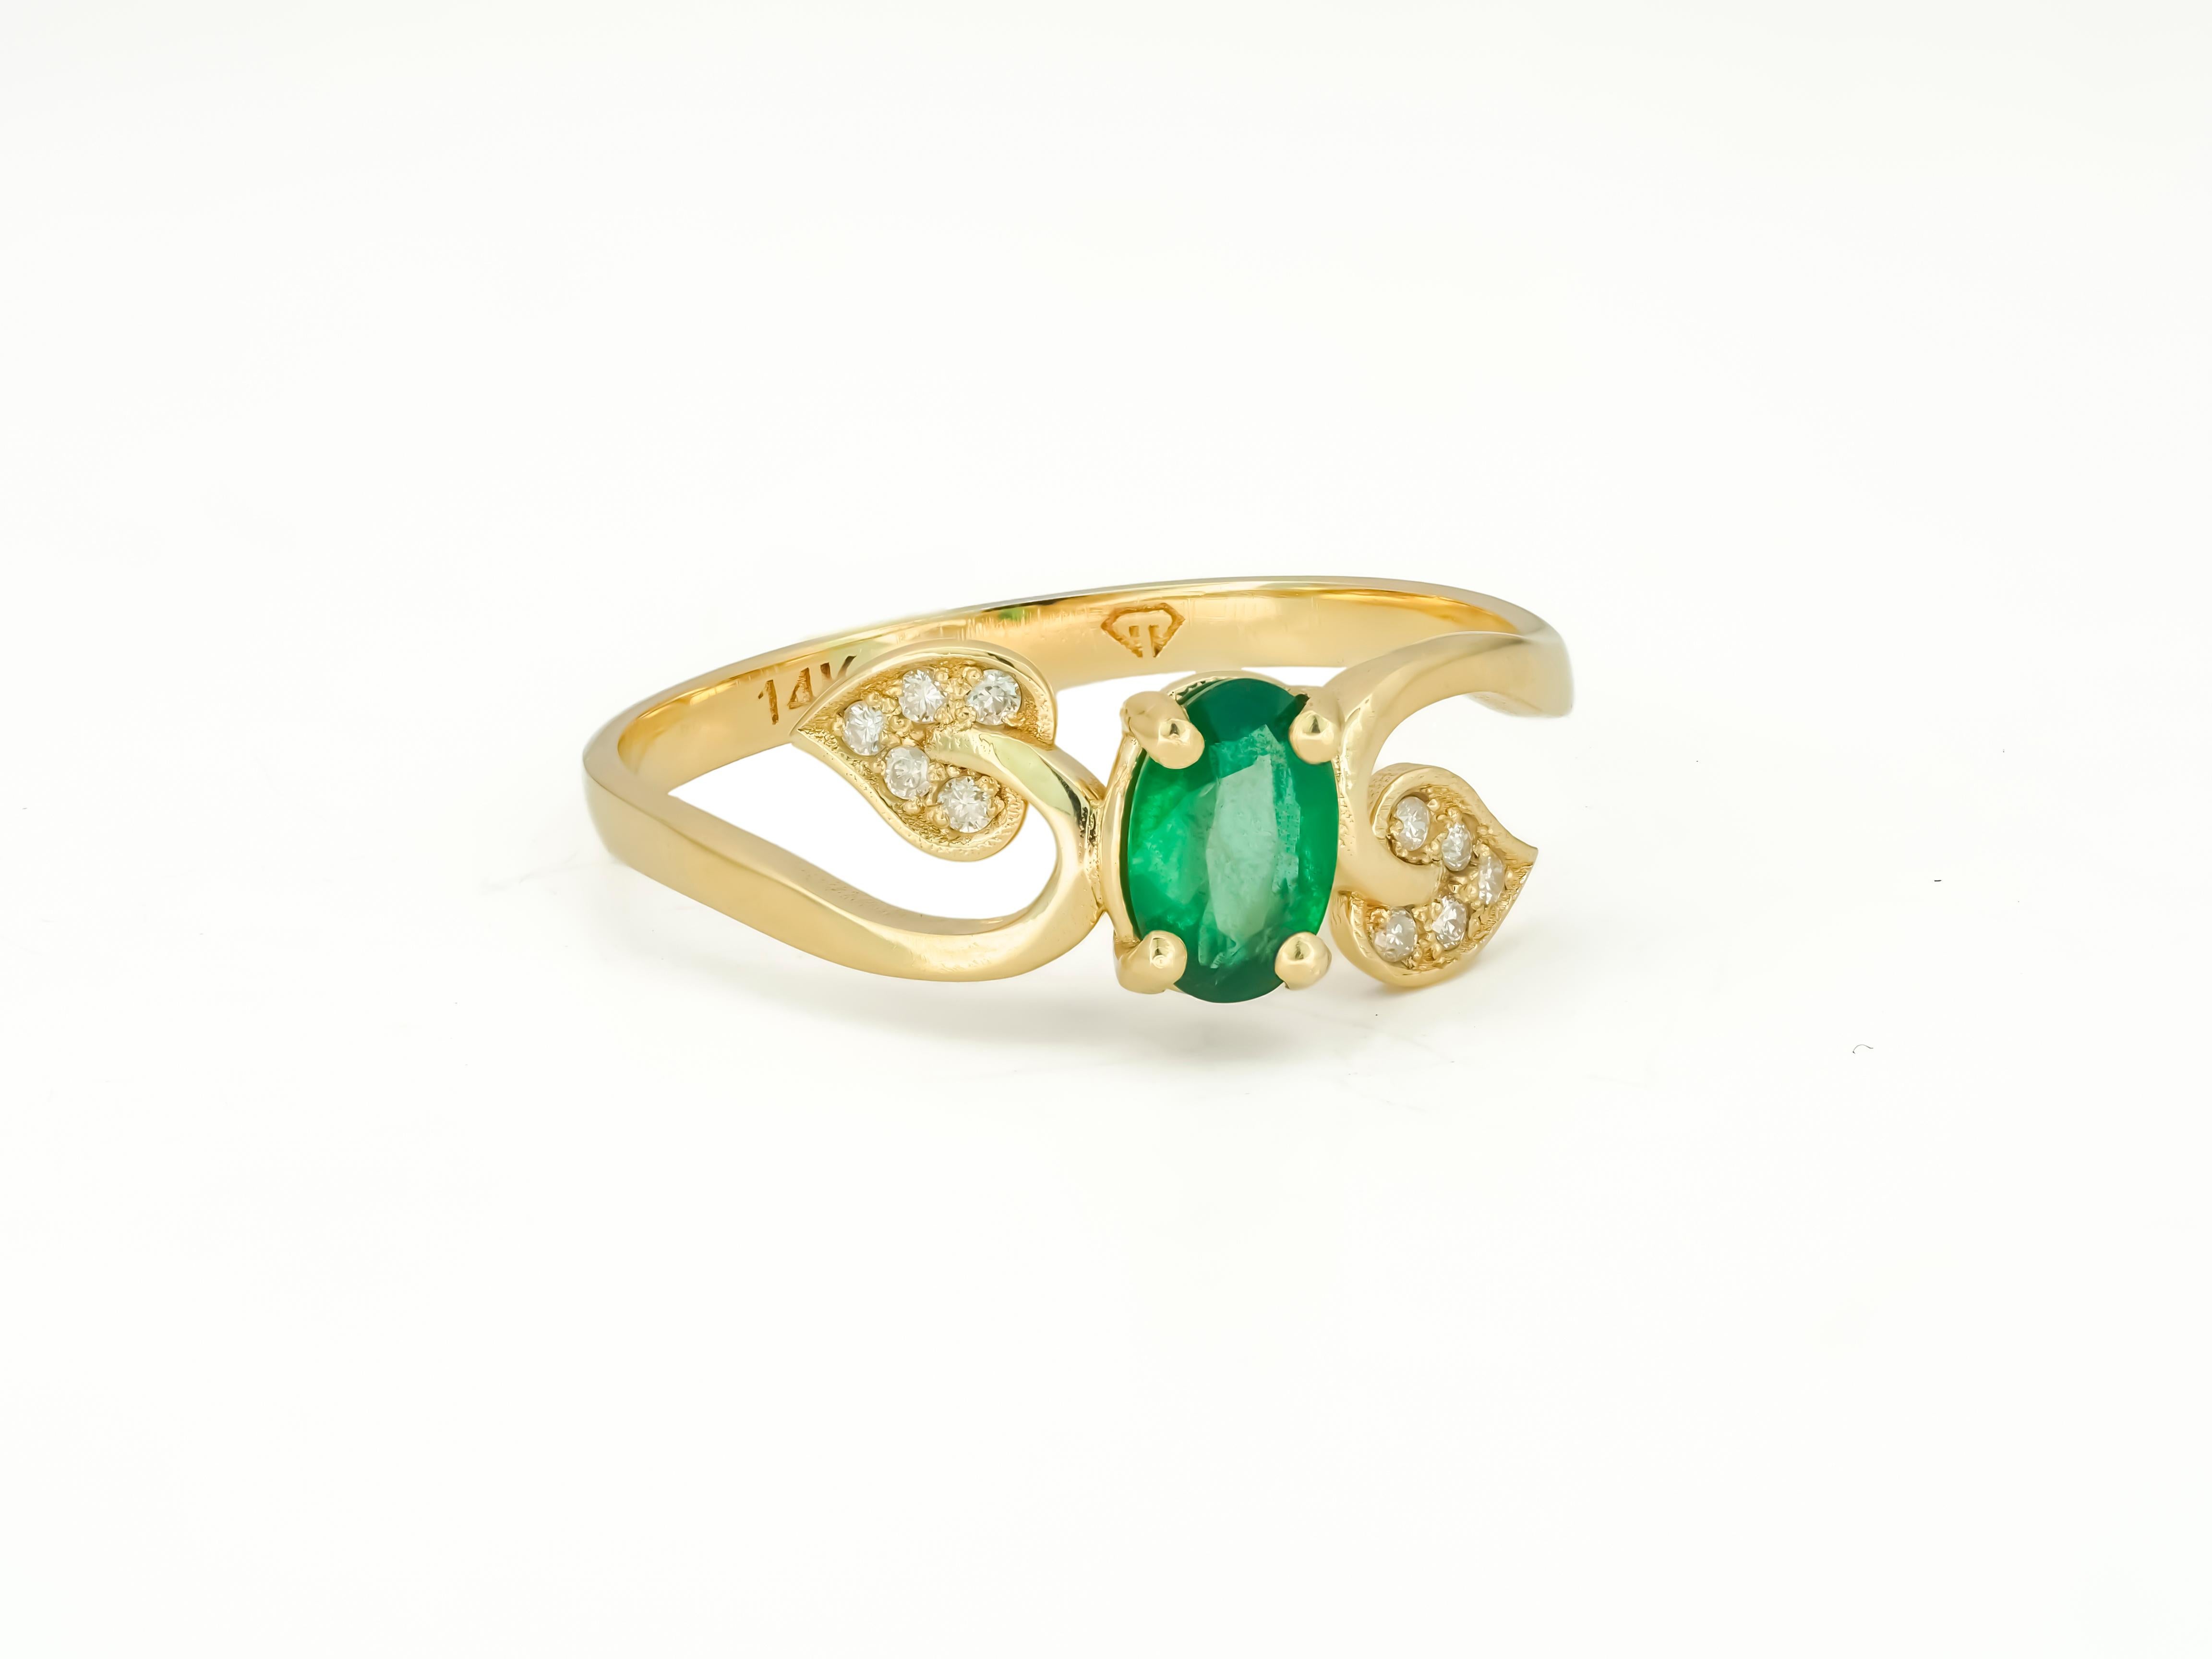 For Sale:  Genuine Emerald 14k Gold Ring, Emerald Engagement Ring! 5